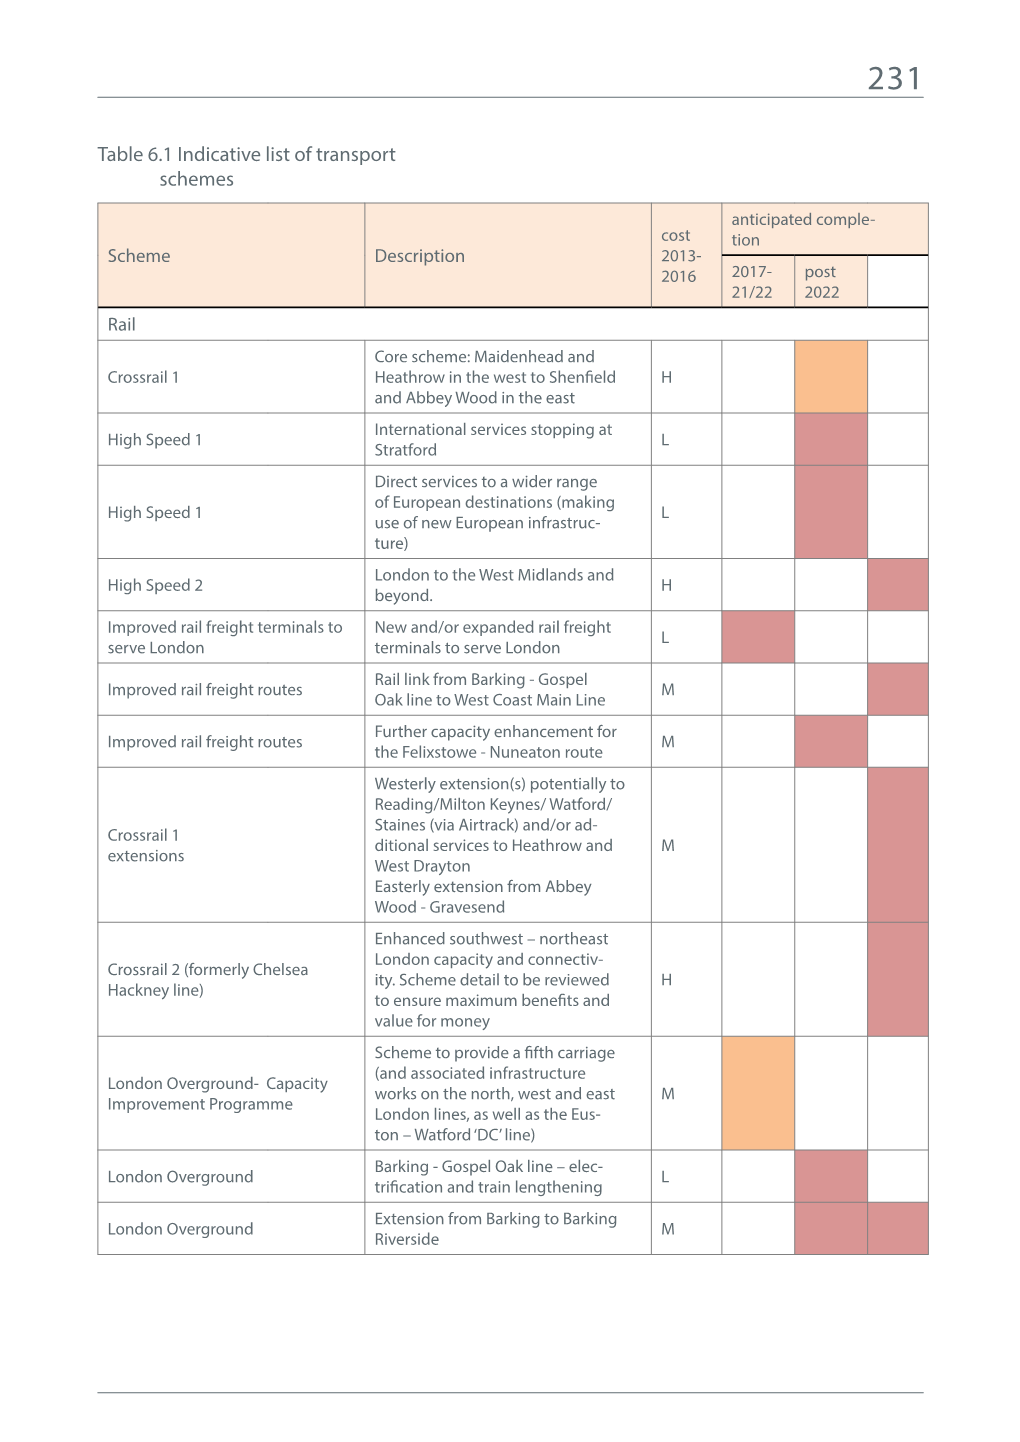 Table 6.1 Indicative List of Transport Schemes